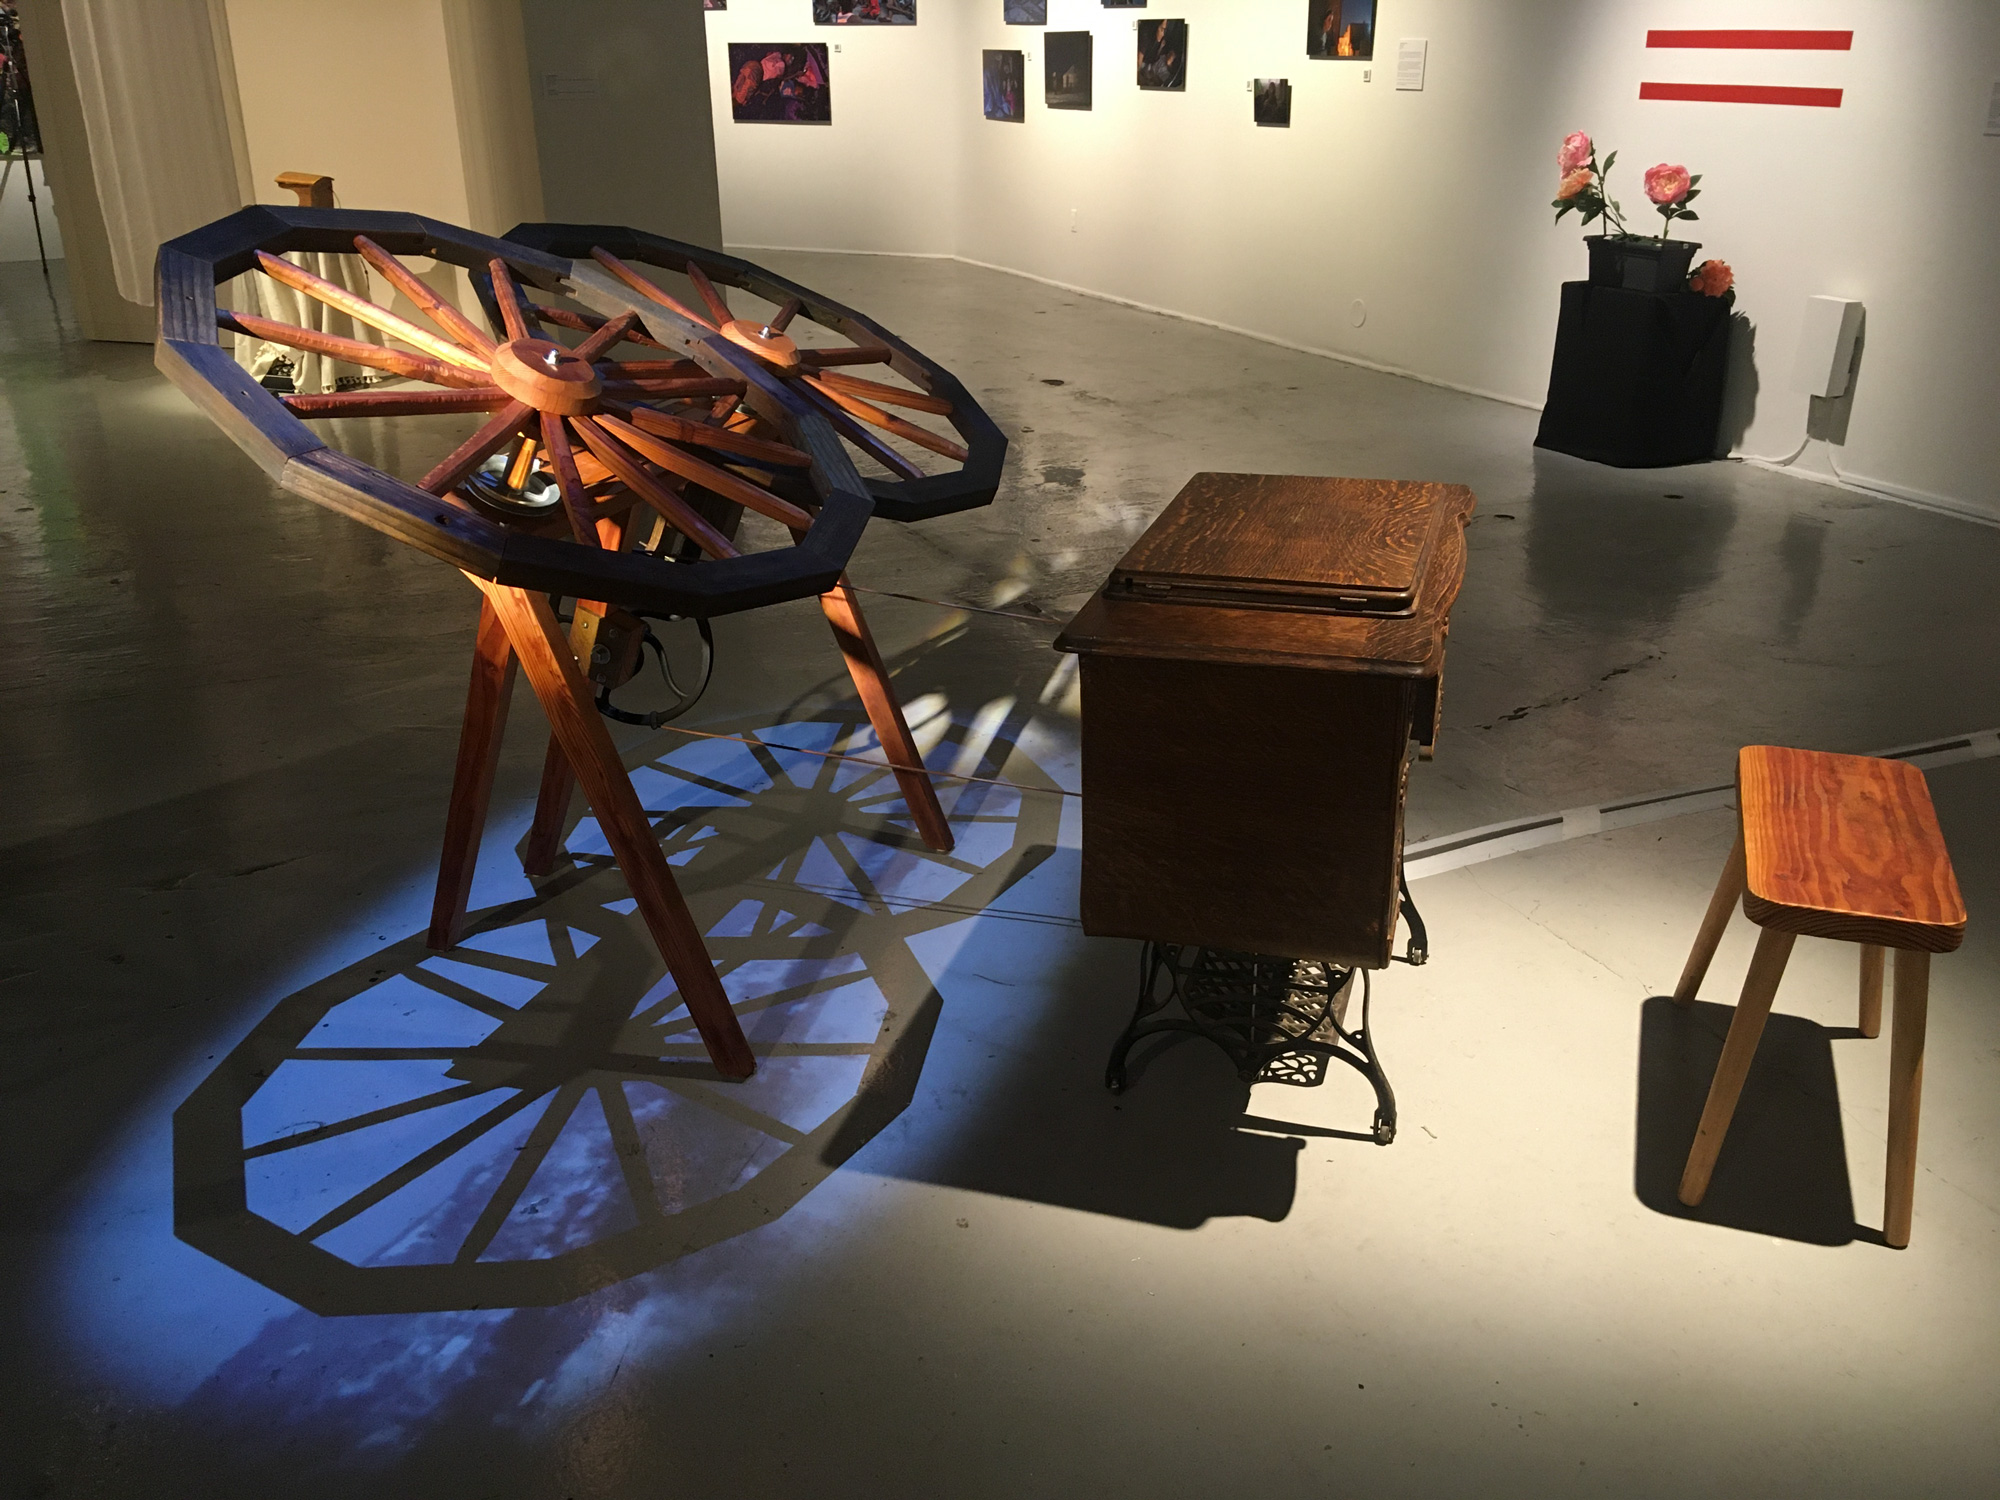 Treadling A Journey at SOMArts Curated by Duygu and Bengu Gün